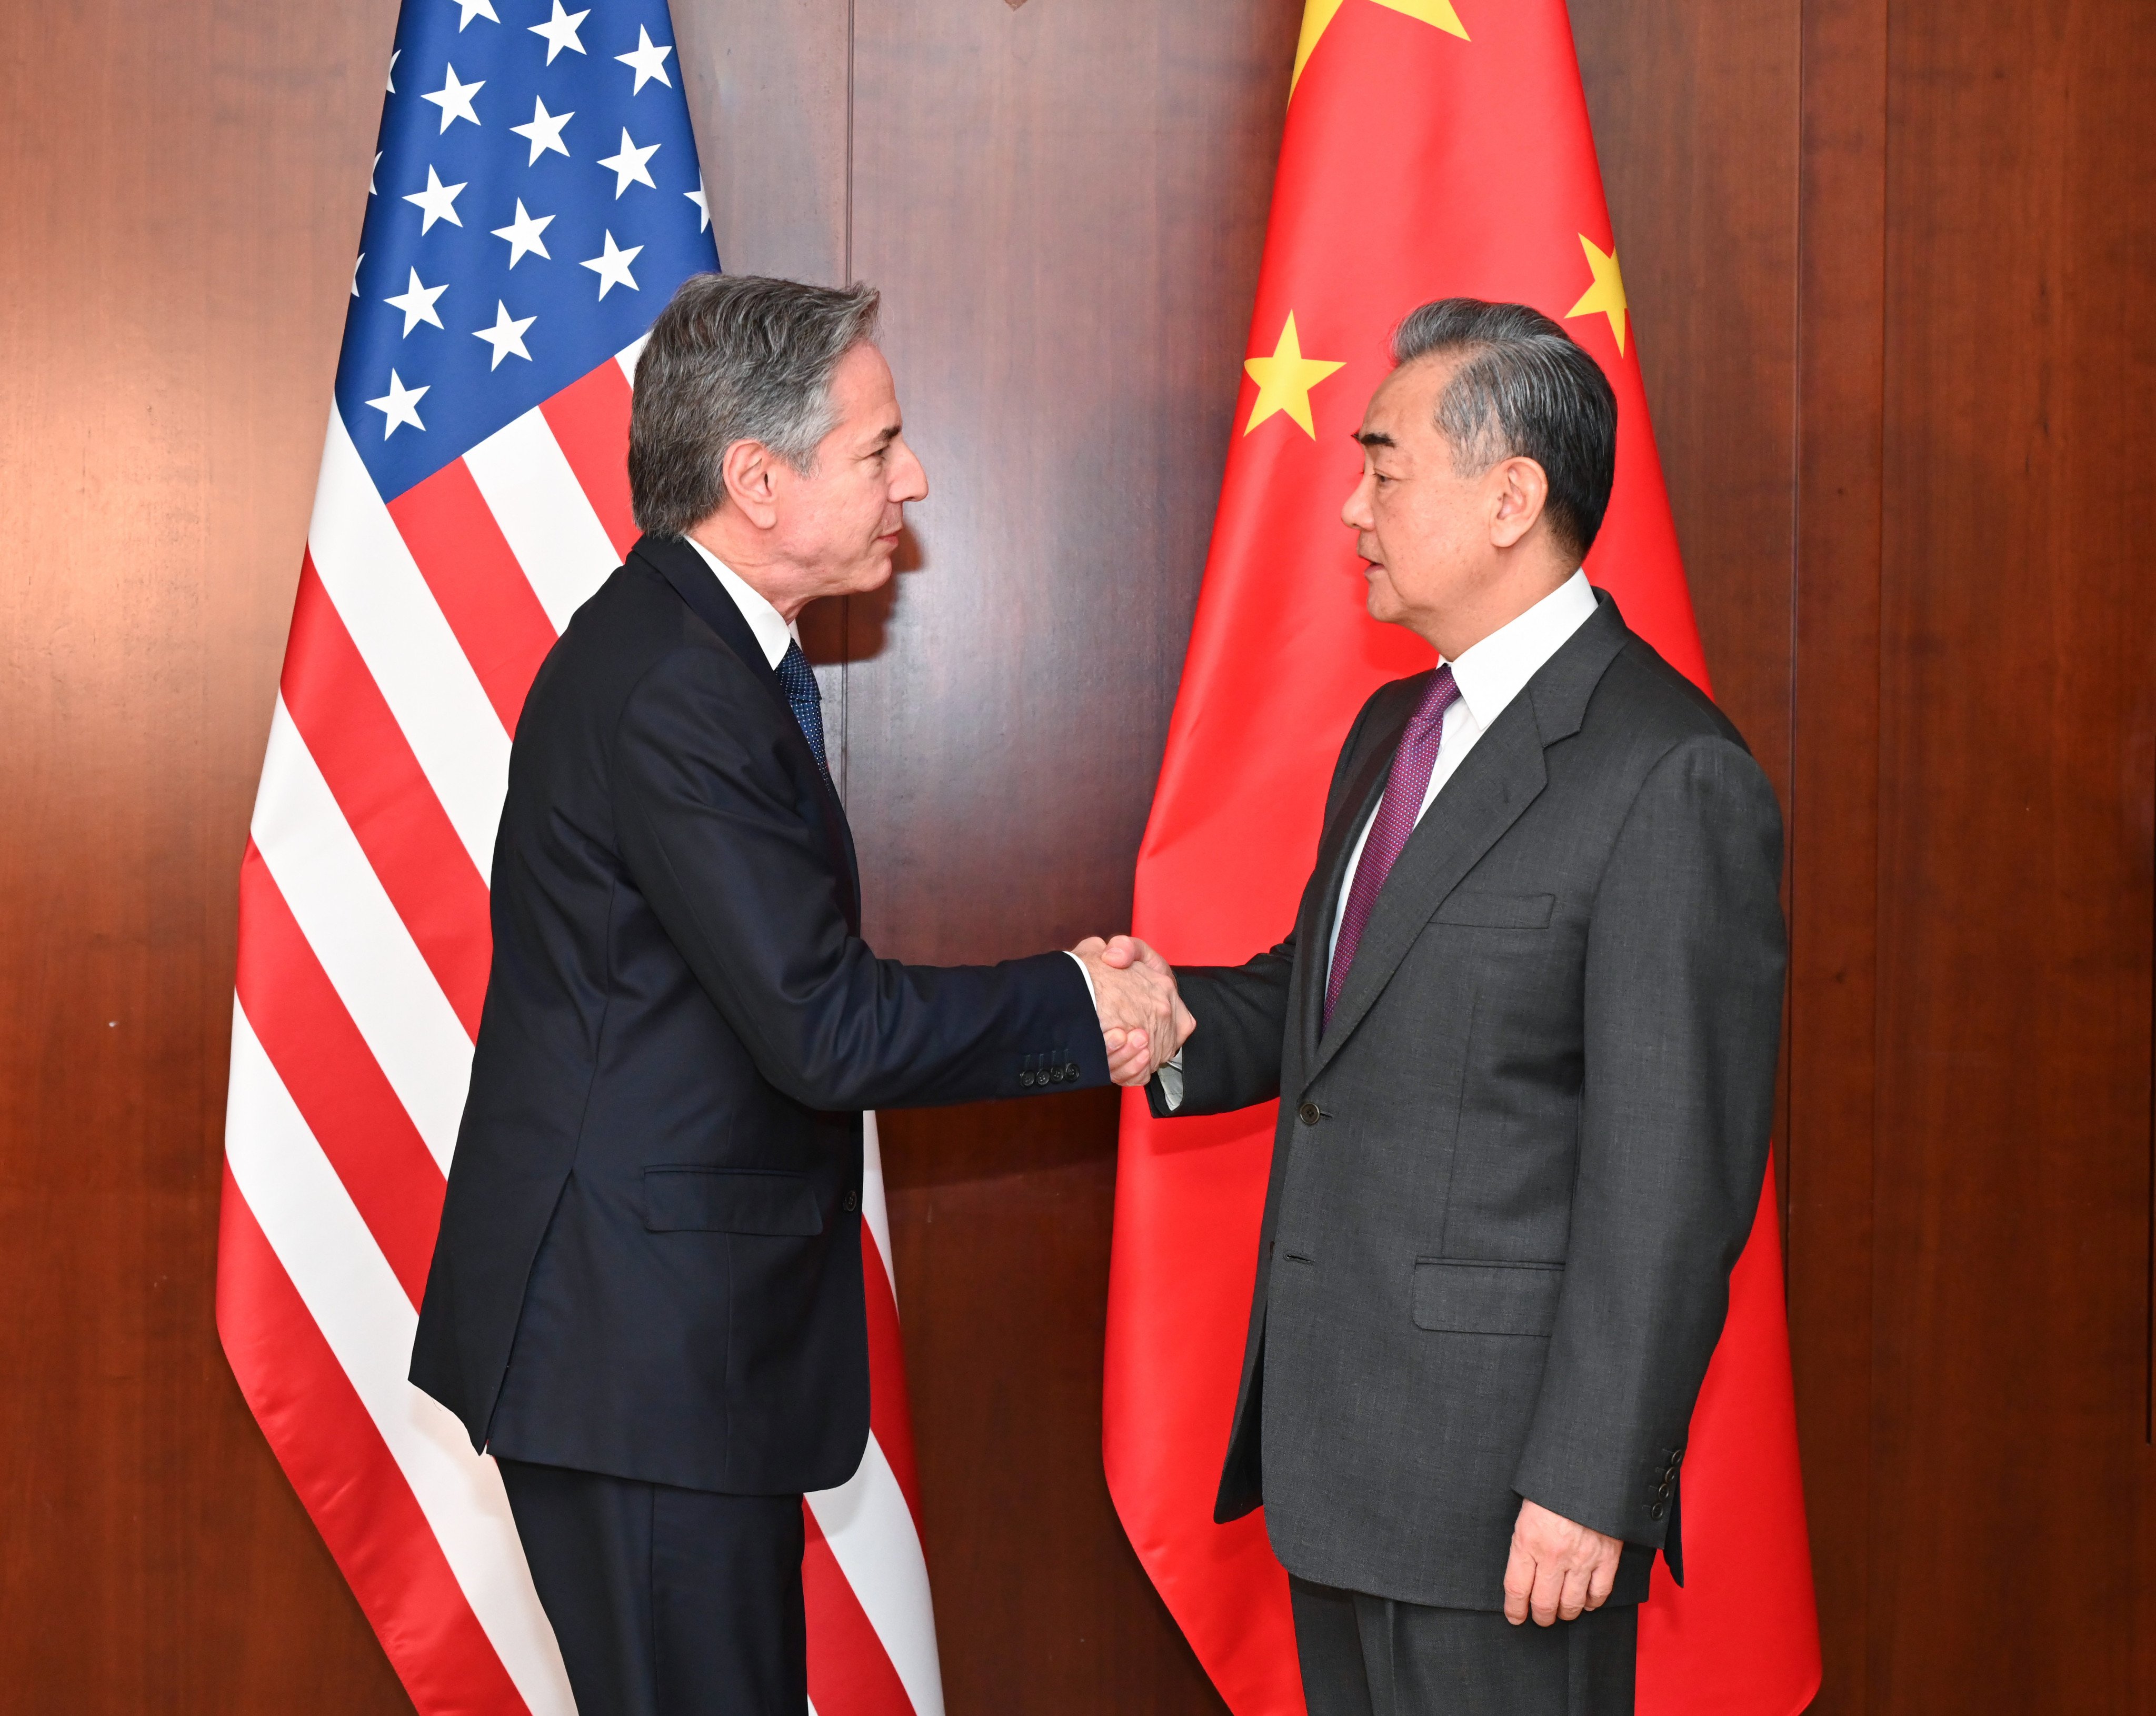 US Secretary of State Antony Blinken (left) shakes hands with Chinese Foreign Minister Wang Yi during their meeting in Munich, Germany on Friday. Photo: Xinhua